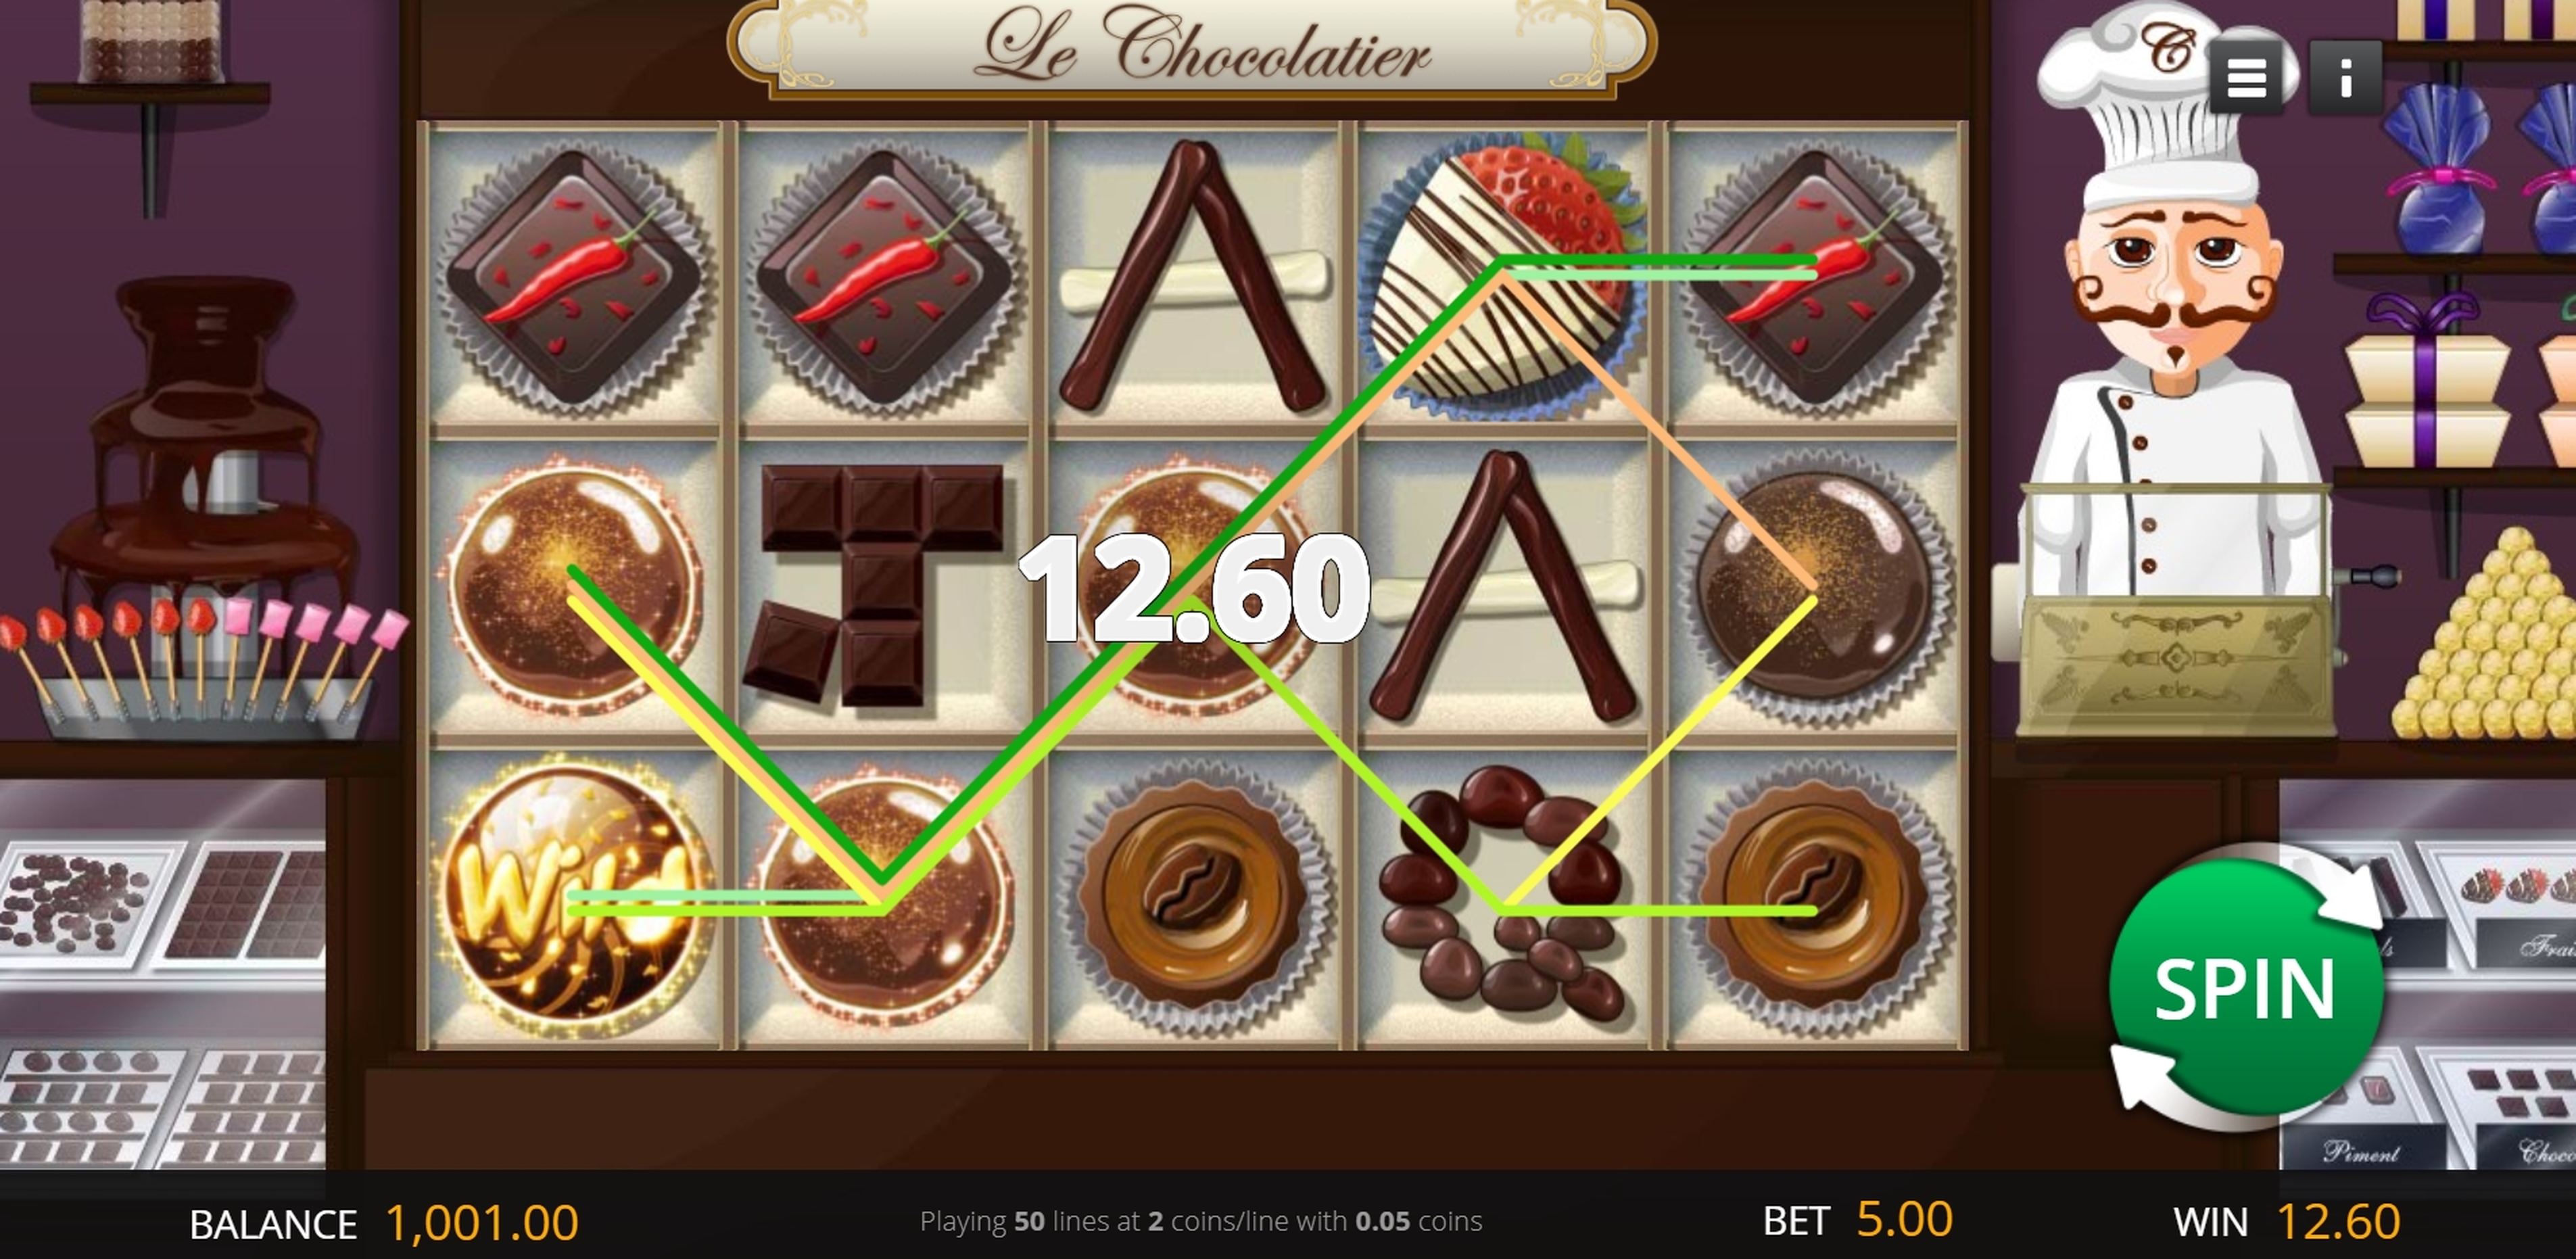 Win Money in Le Chocolatier Free Slot Game by Genii